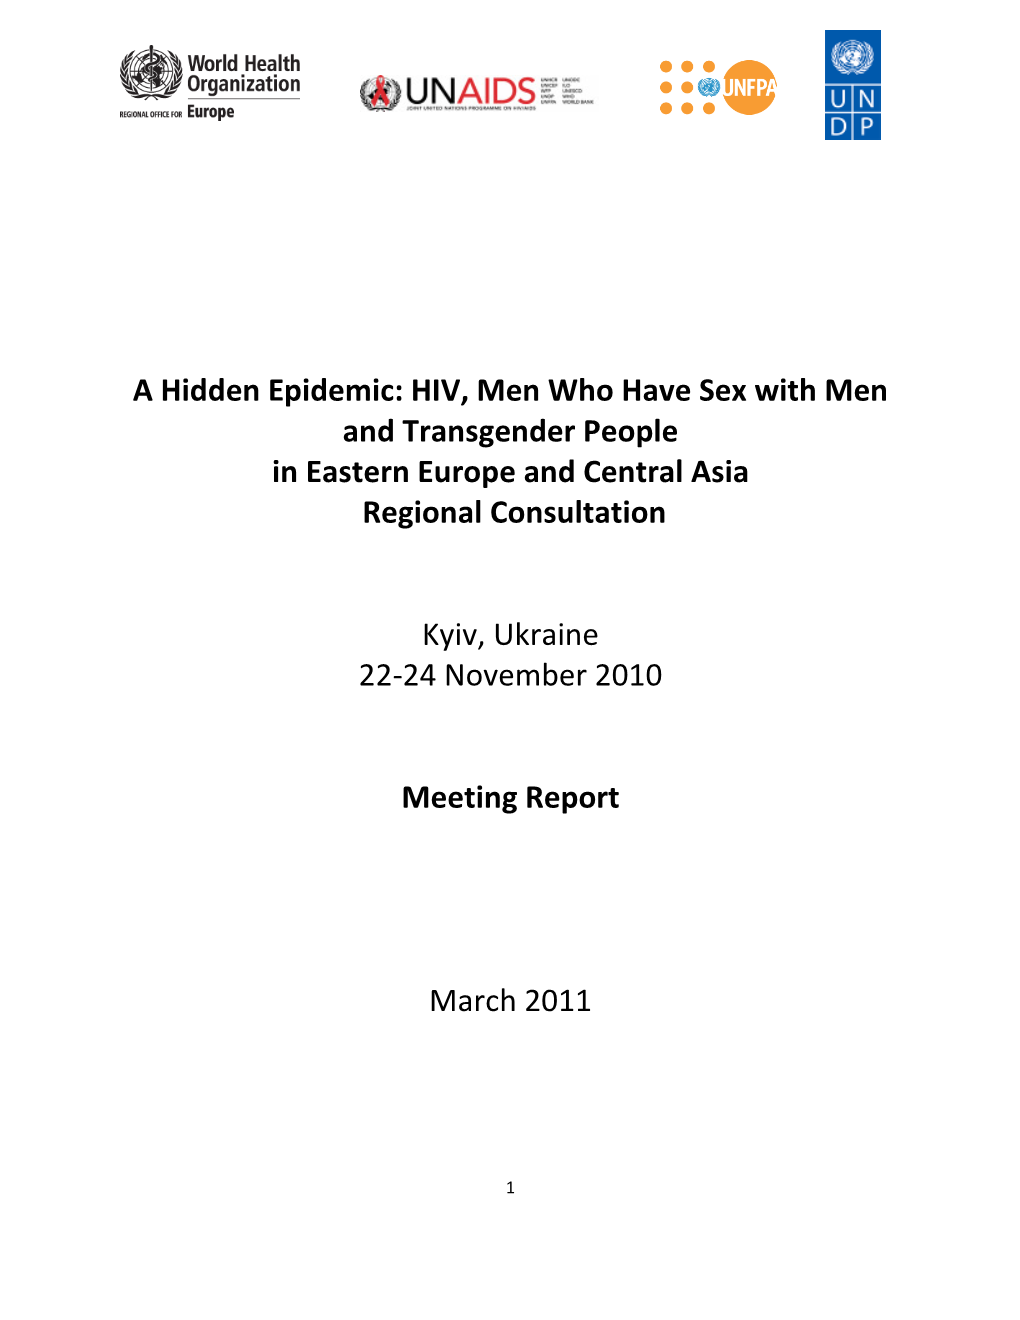 A Hidden Epidemic: HIV, Men Who Have Sex with Men and Transgender People in Eastern Europe and Central Asia Regional Consultation